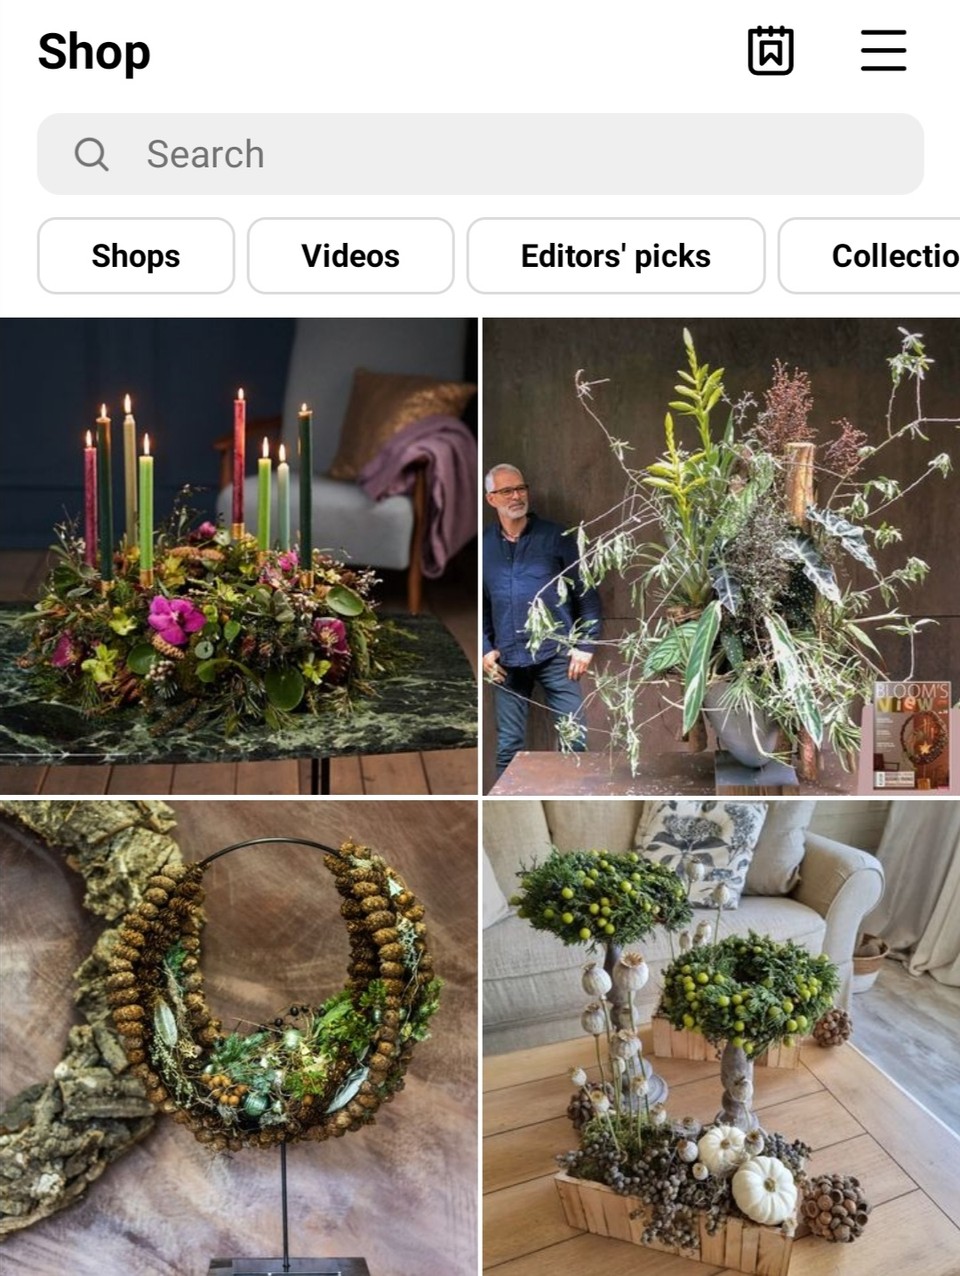 Online Marketing Trends the Floral Industry Should Embrace Shoppable Content